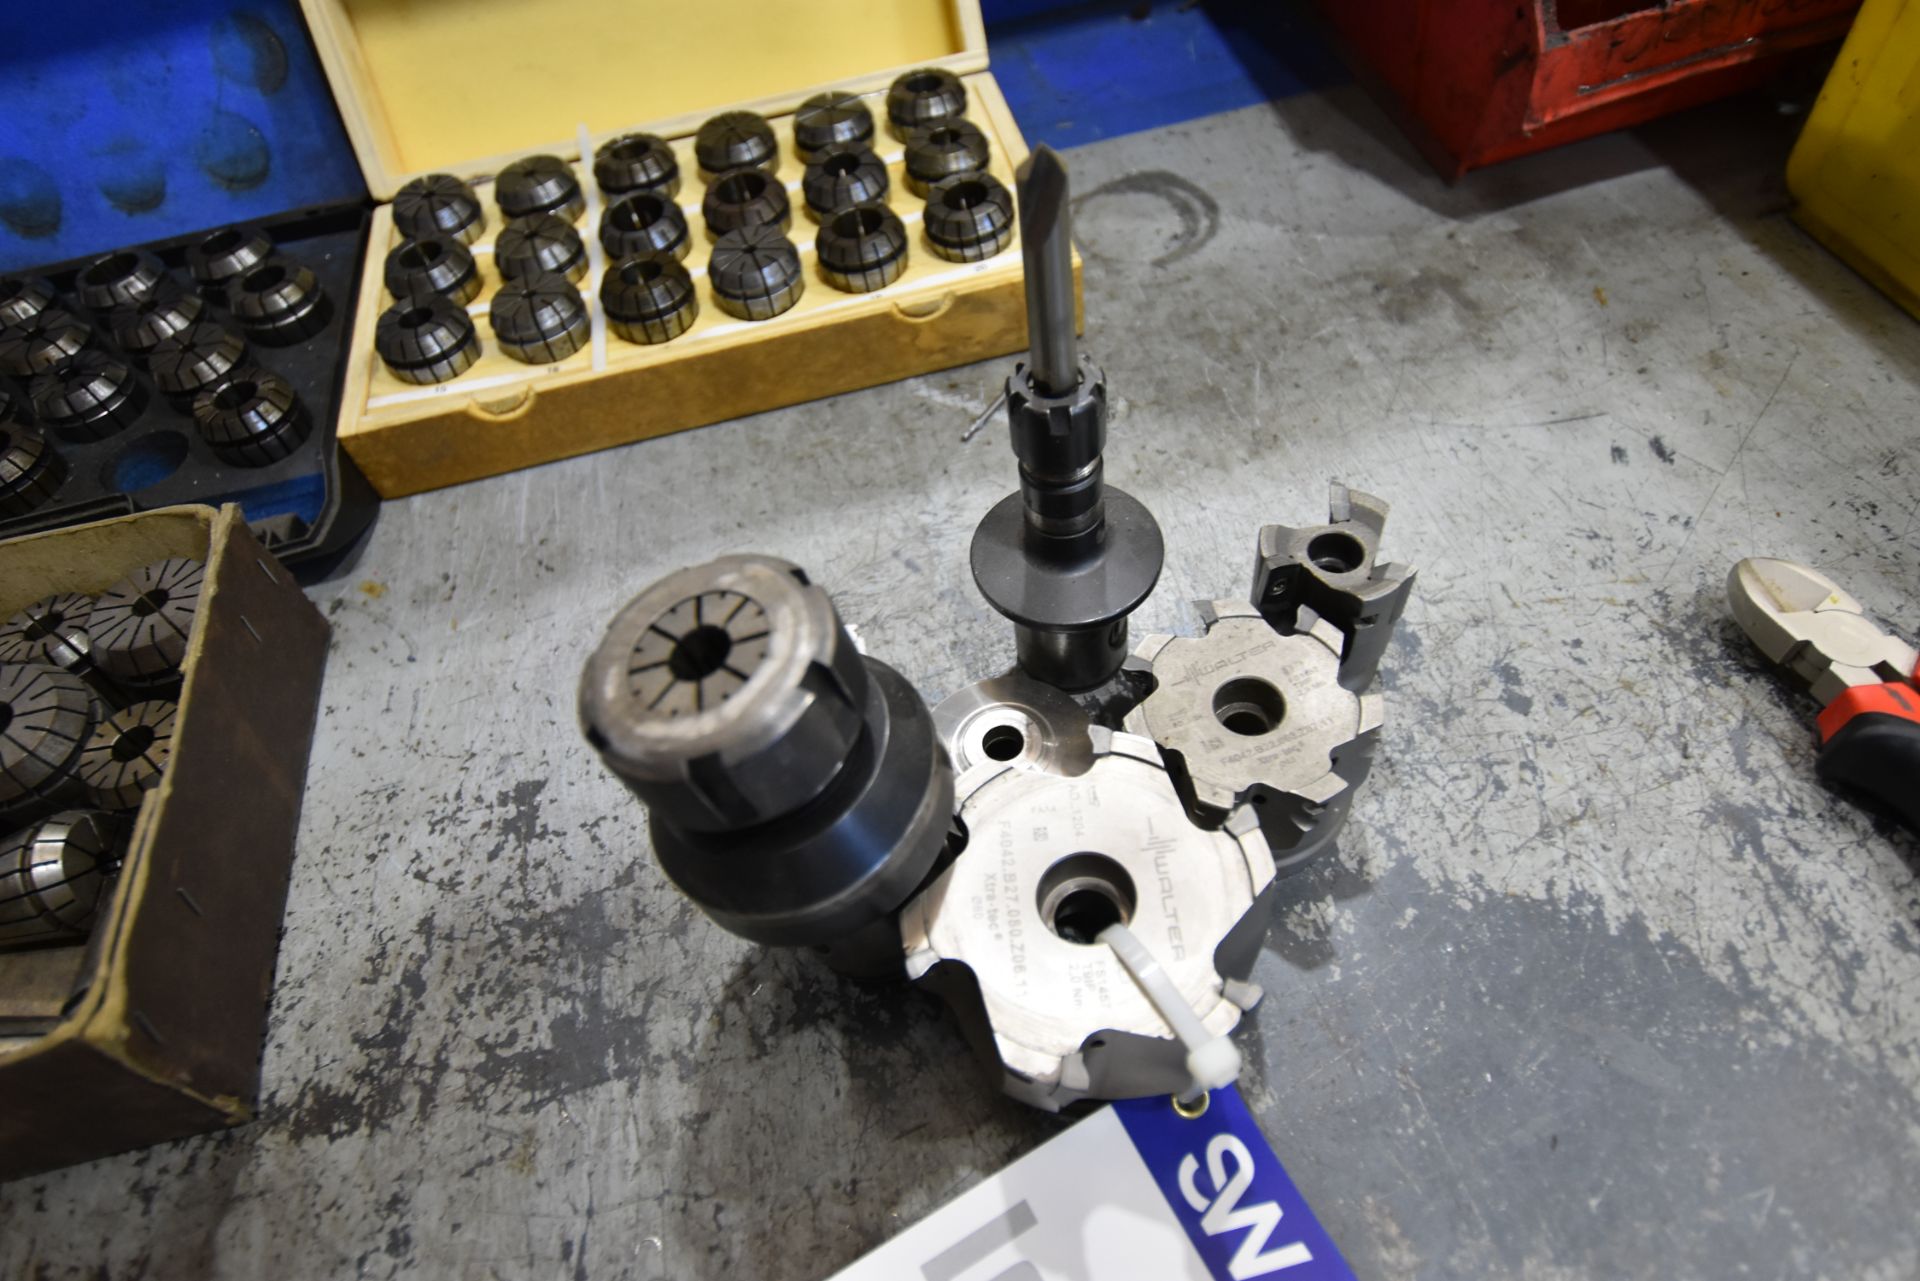 Milling Tooling, as set out